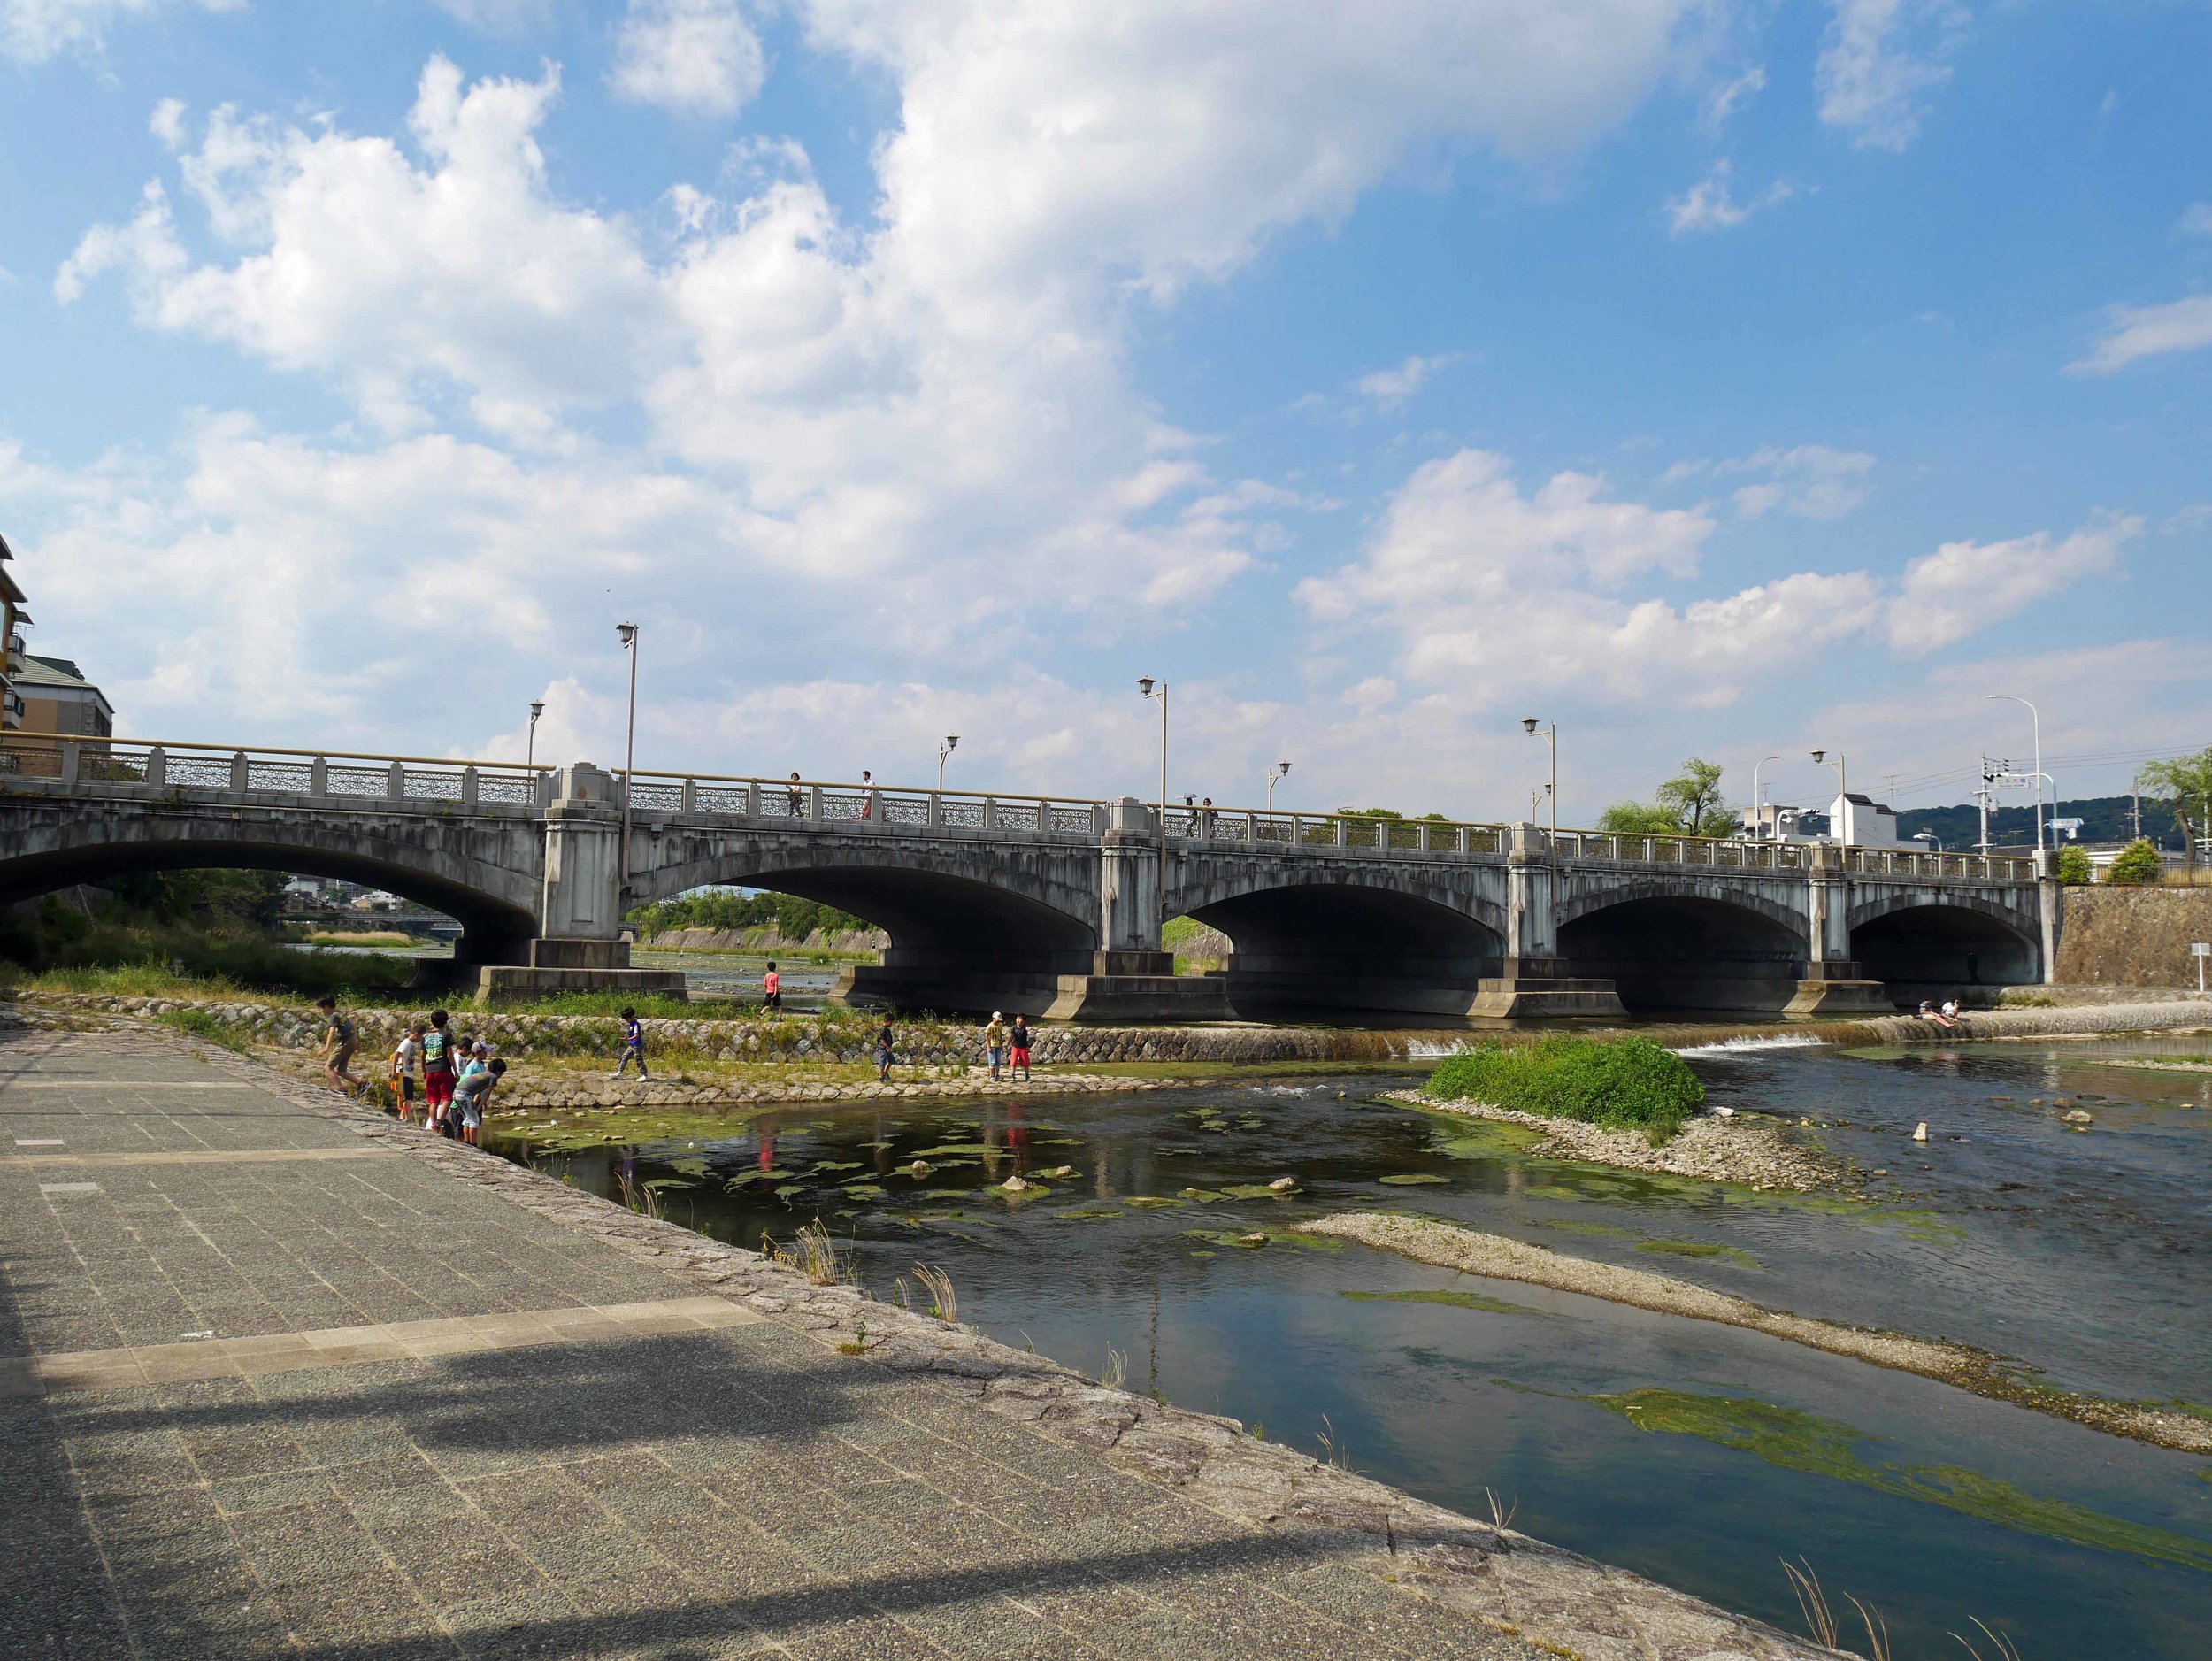  Hopping back on our bikes, we rode along the beautiful Kamo River en route to the Daitoku-Ji temple complex 